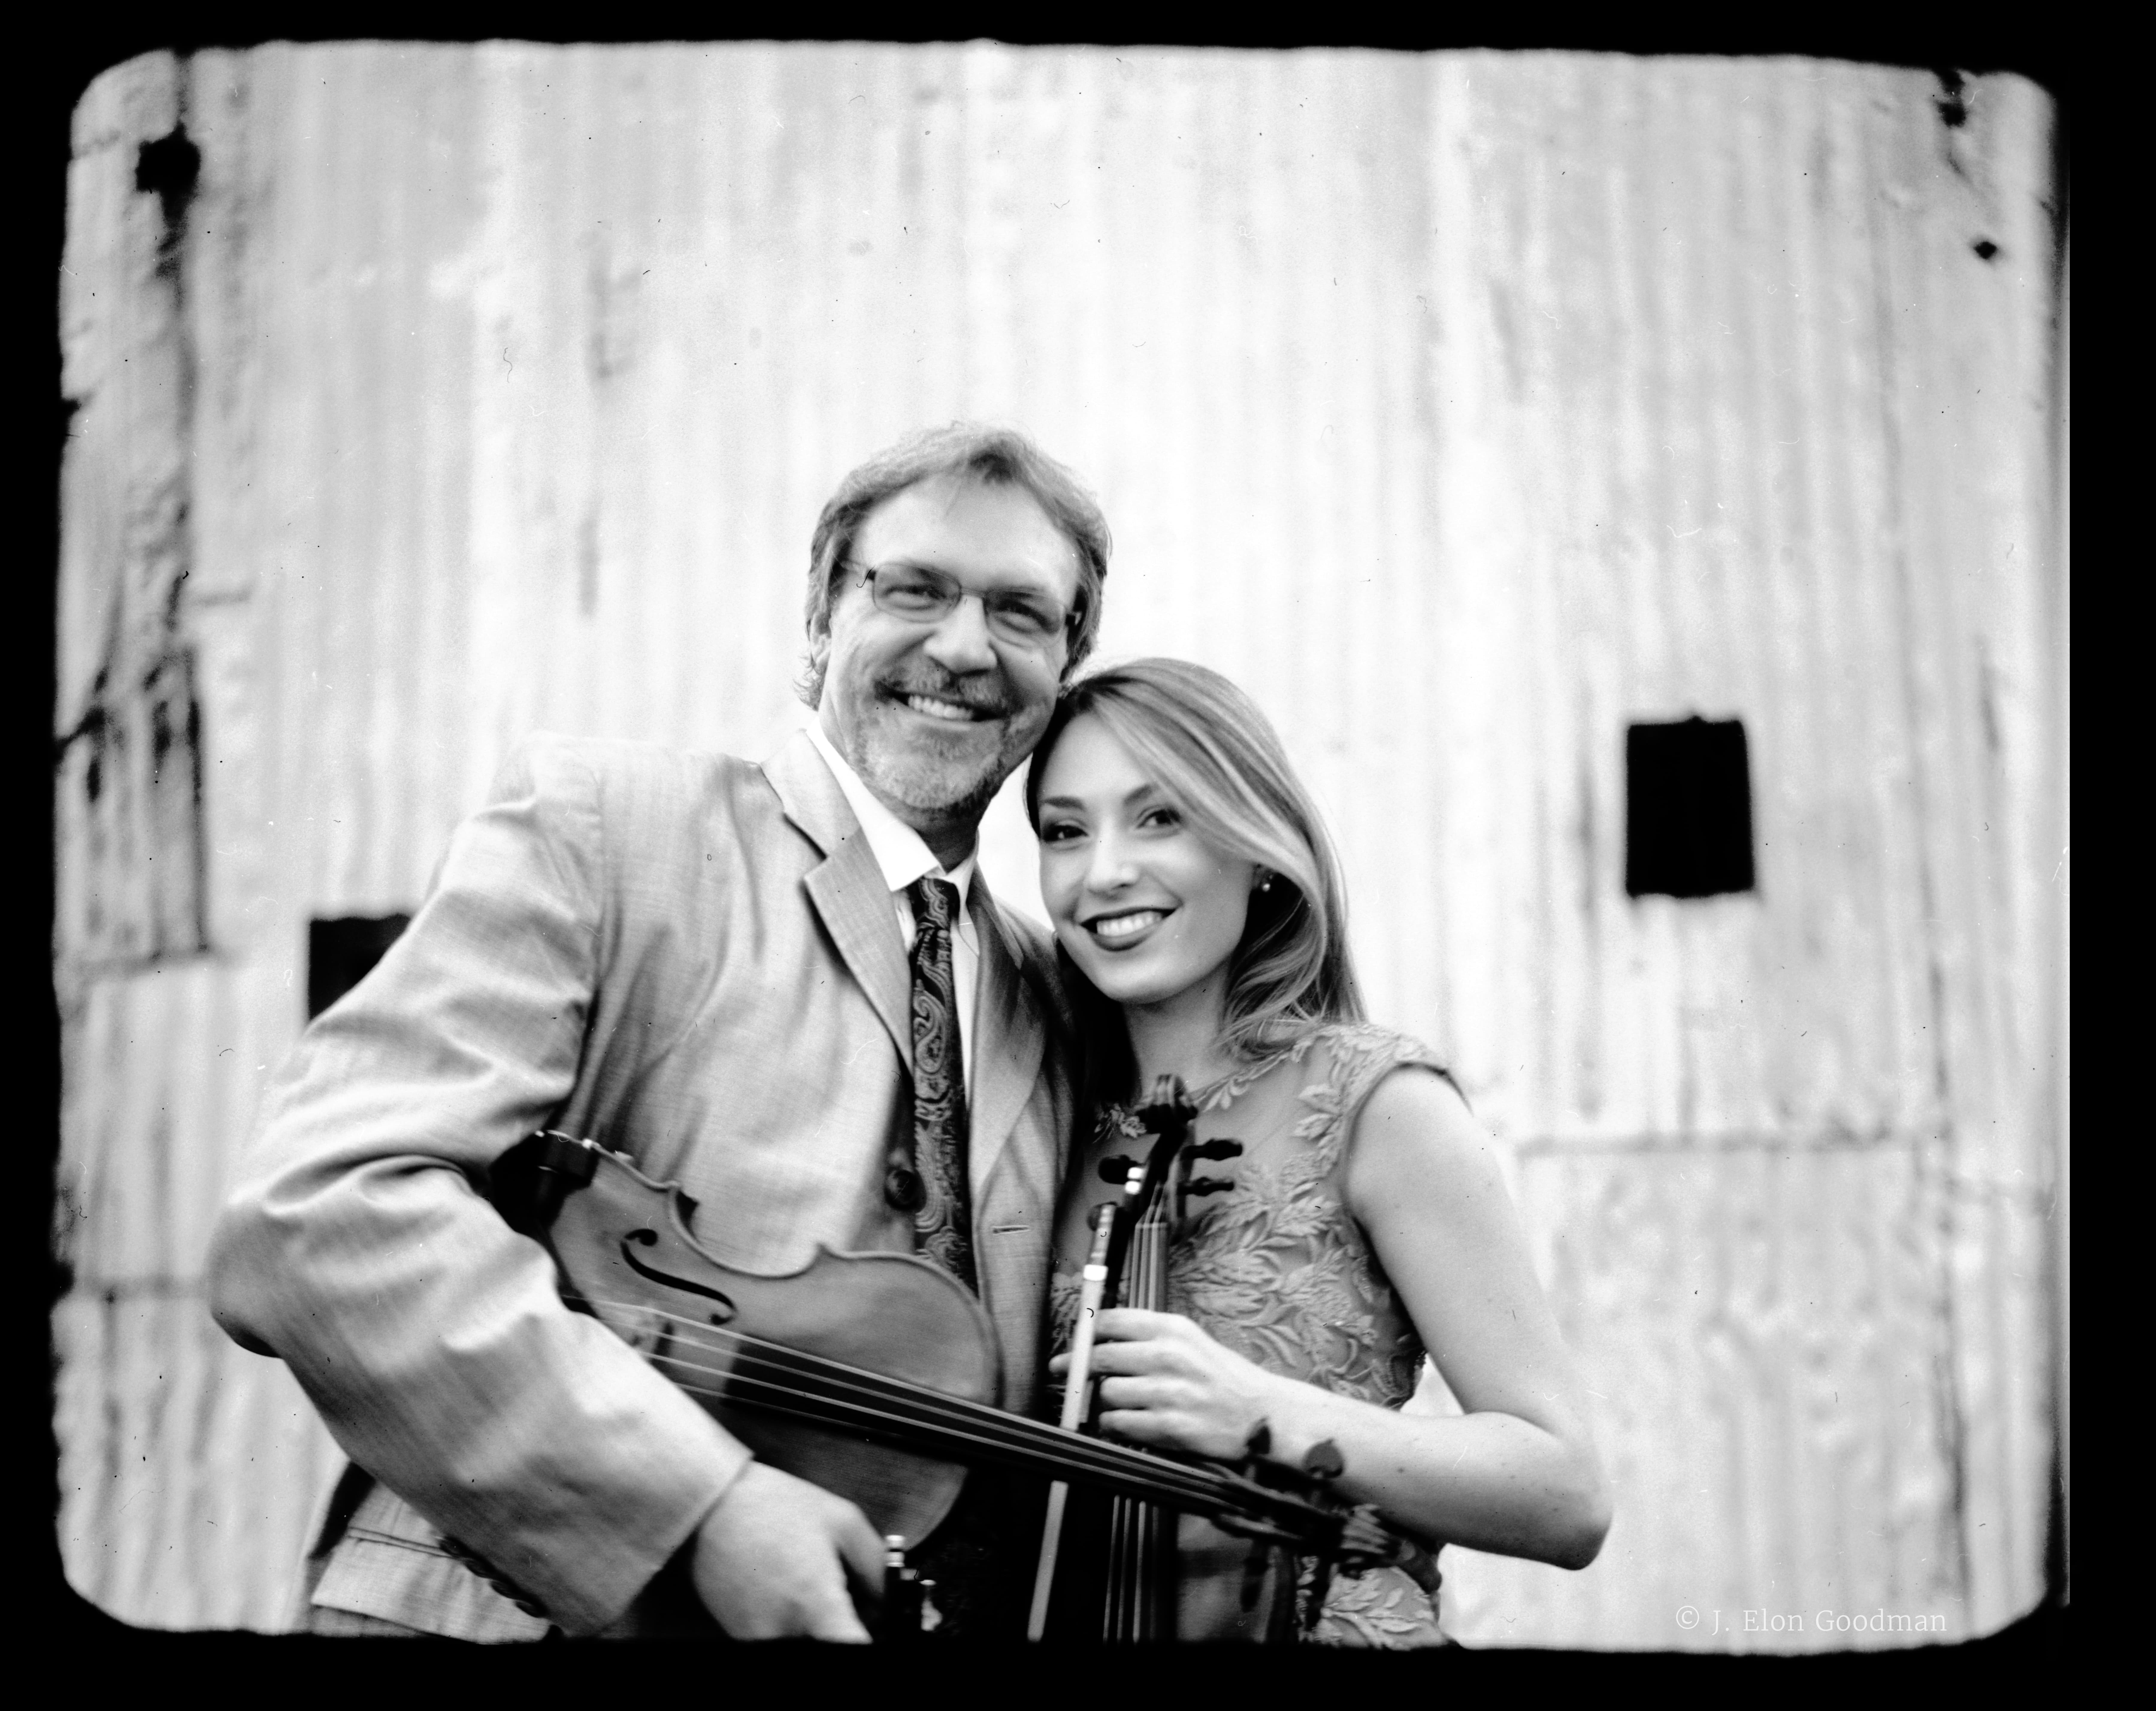 A black and white pictyure of Mark and Maggie standing together, holding their violins.